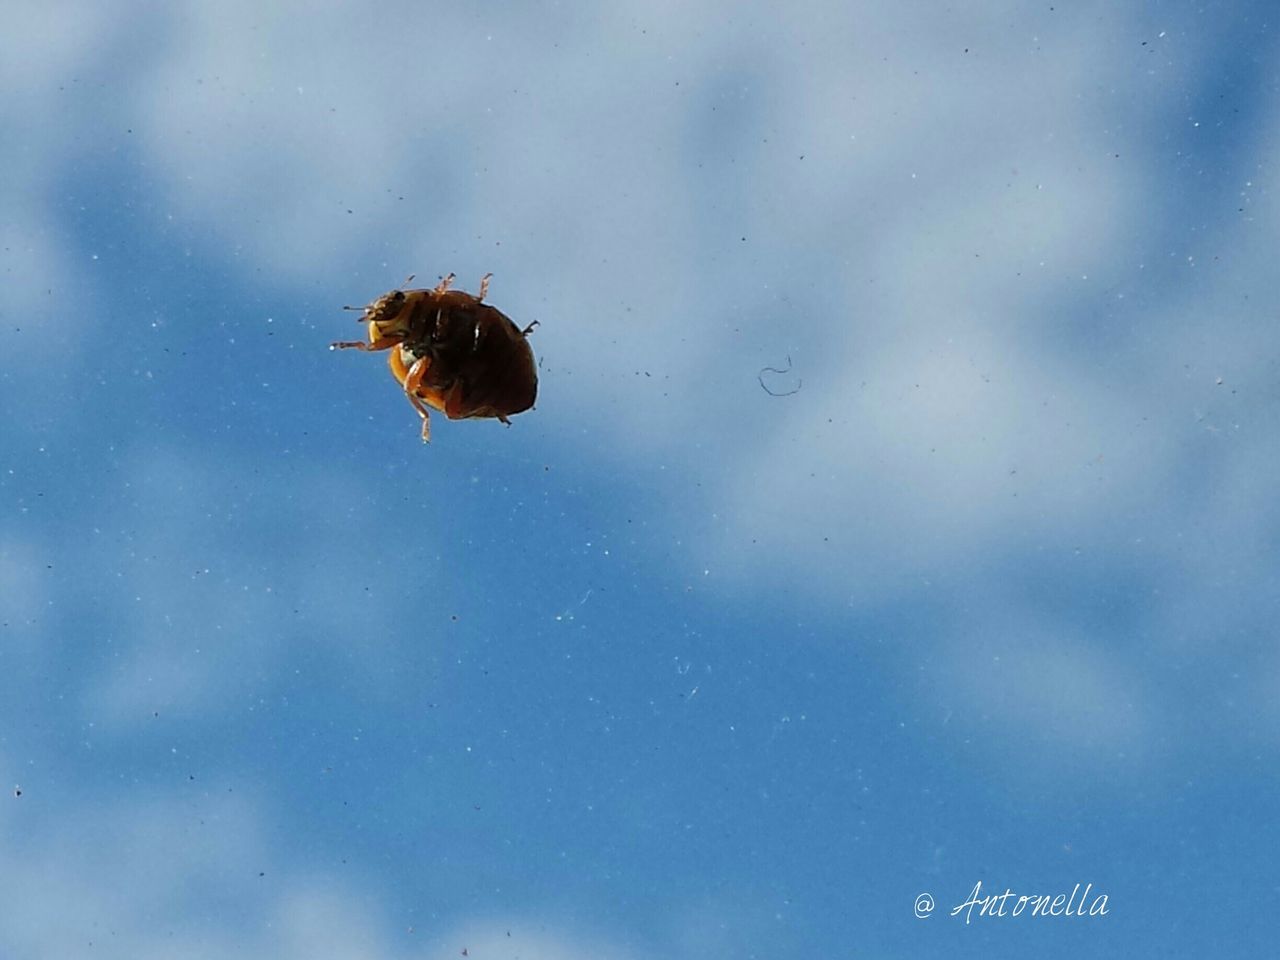 animal themes, animals in the wild, sky, wildlife, water, transparent, insect, low angle view, window, glass - material, wet, spider, nature, drop, cloud - sky, weather, no people, one animal, reflection